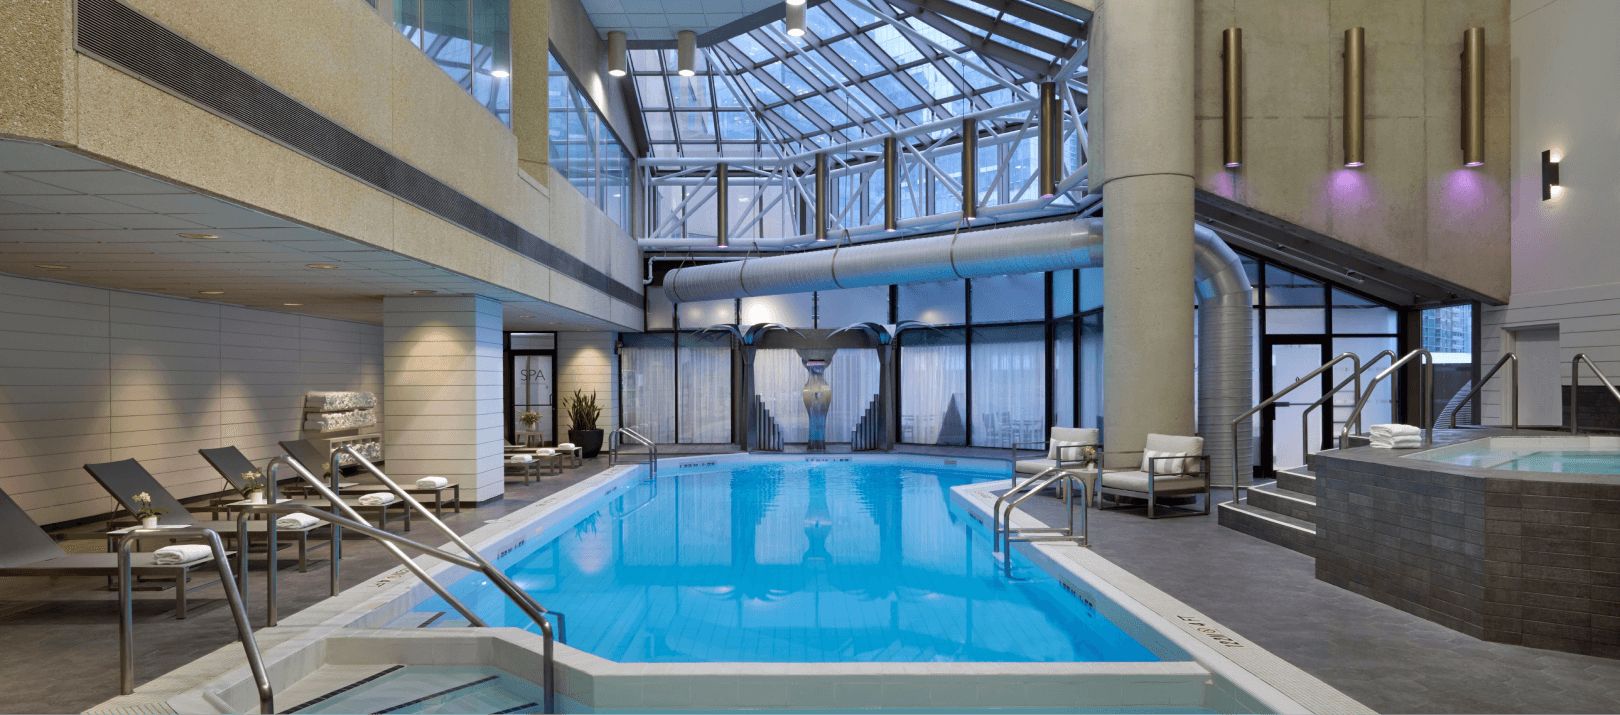 Indoor pool surrounded by lawn chairs